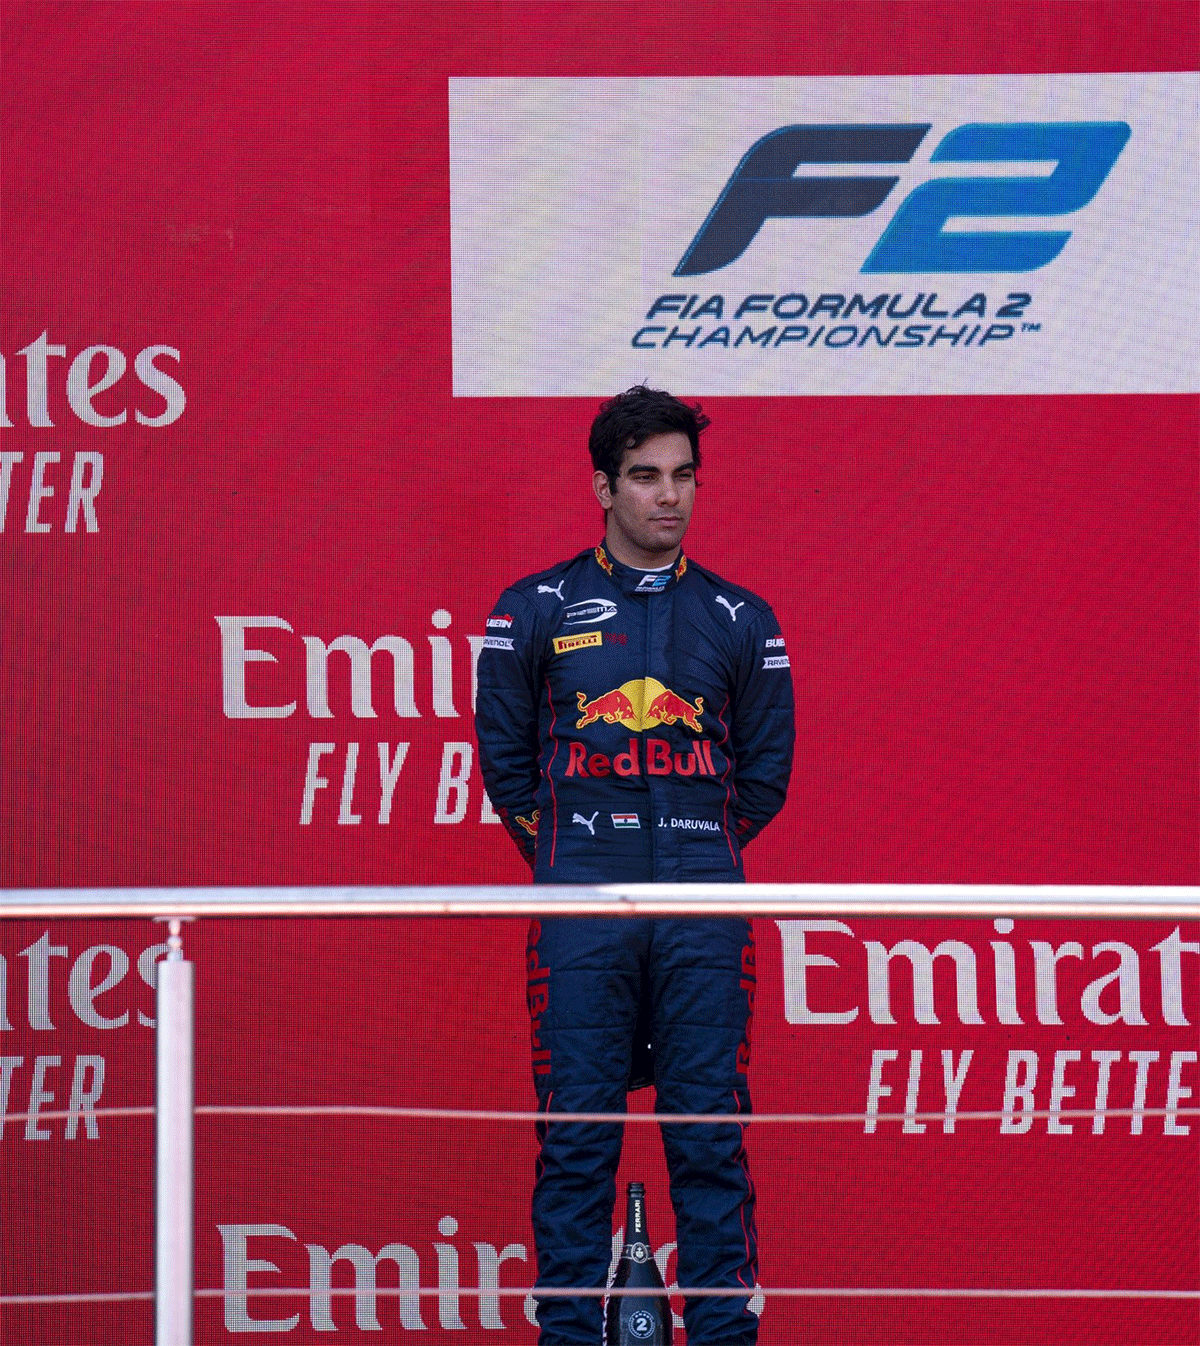 India's Jehan Daruvala, driving for Red Bull, finished 2nd at the F2 race in Baku on Saturday